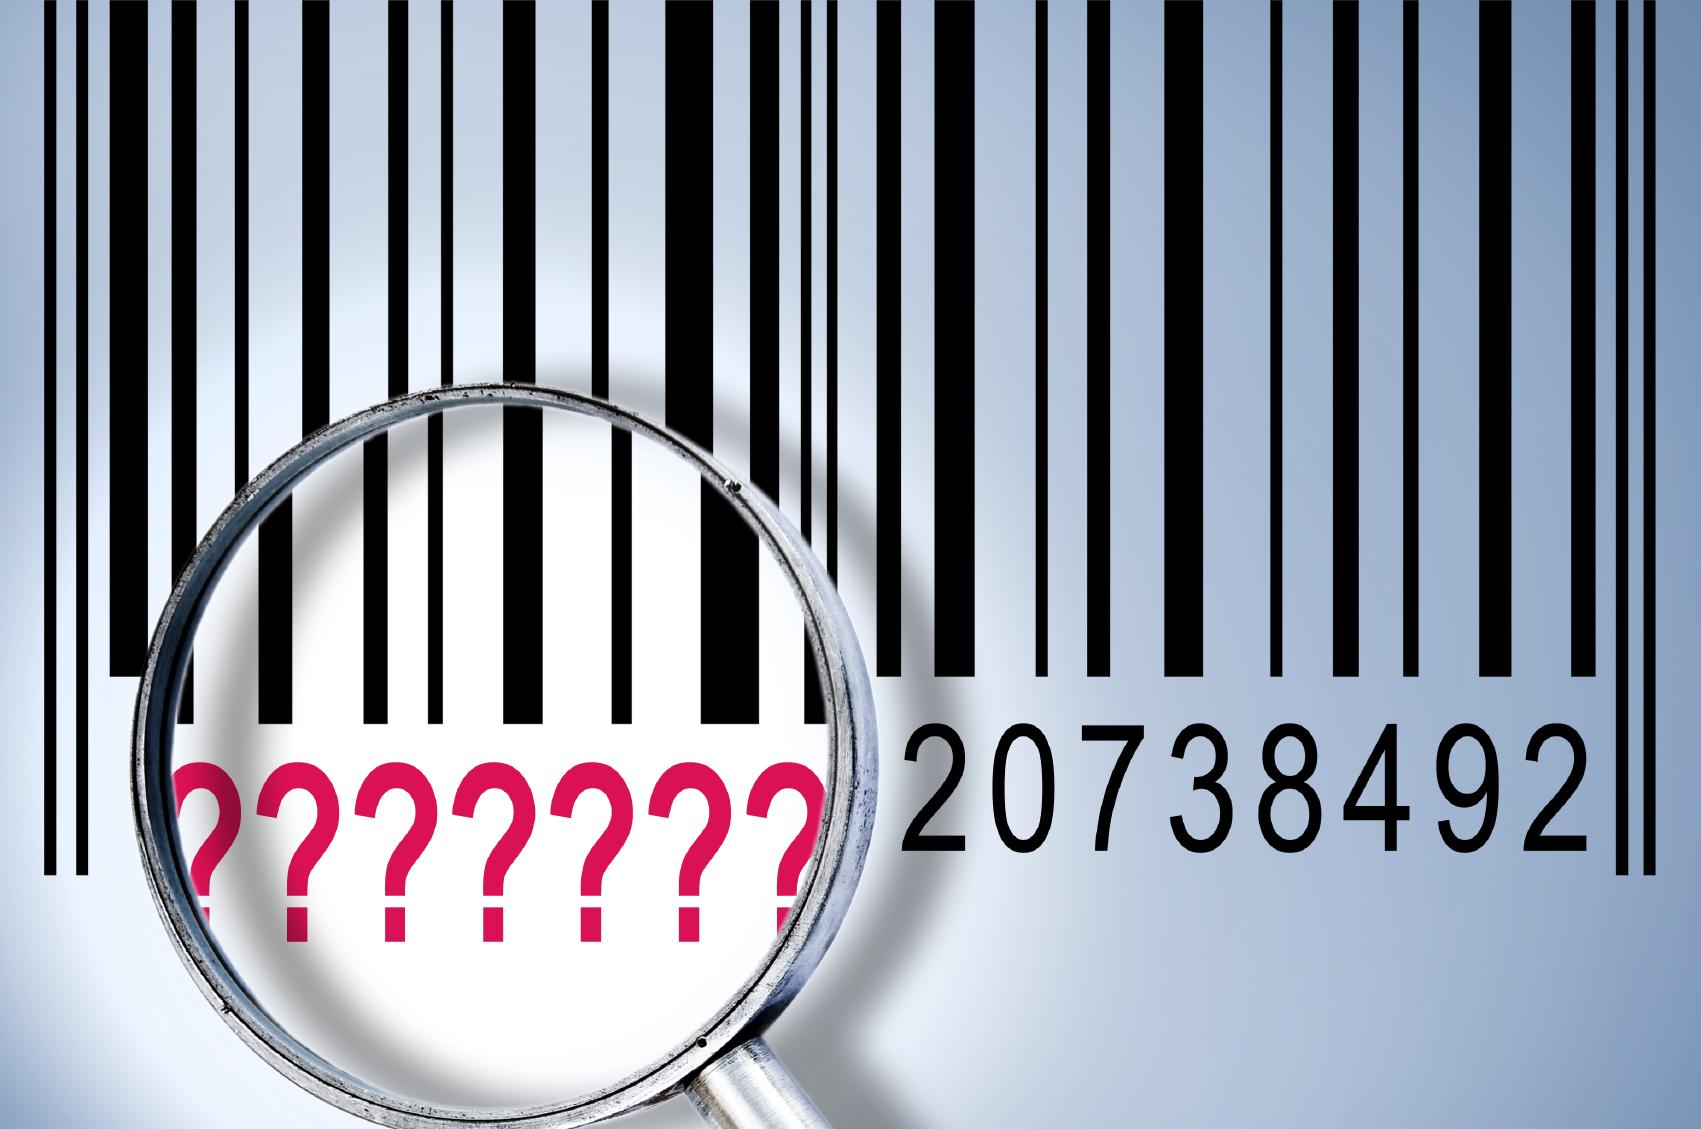 ????? on barcode